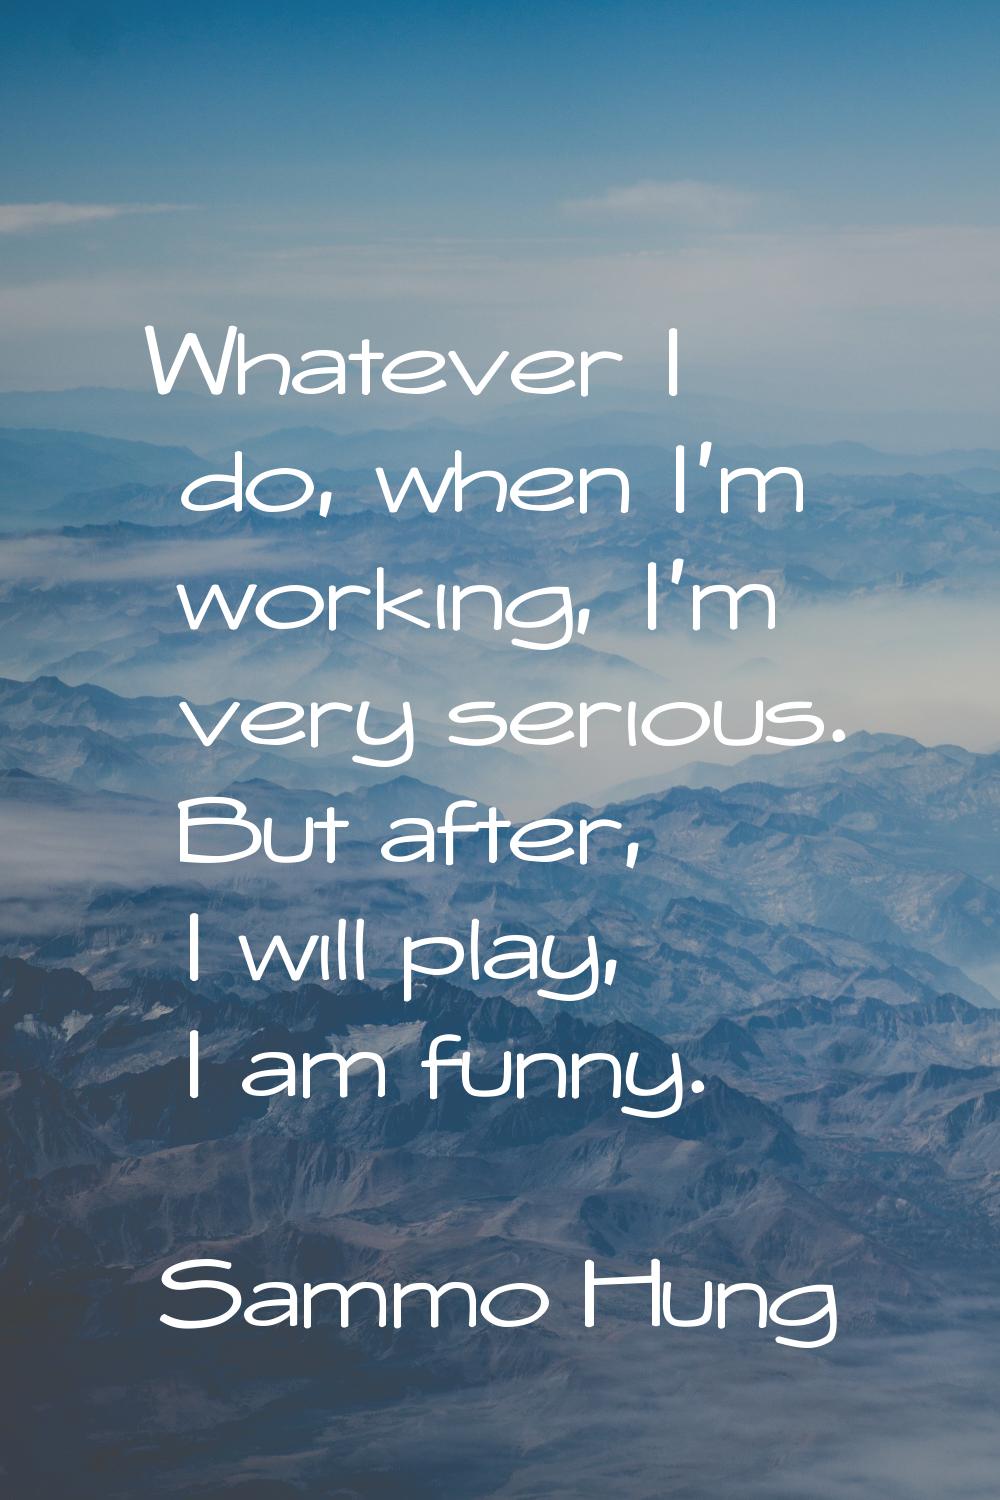 Whatever I do, when I'm working, I'm very serious. But after, I will play, I am funny.